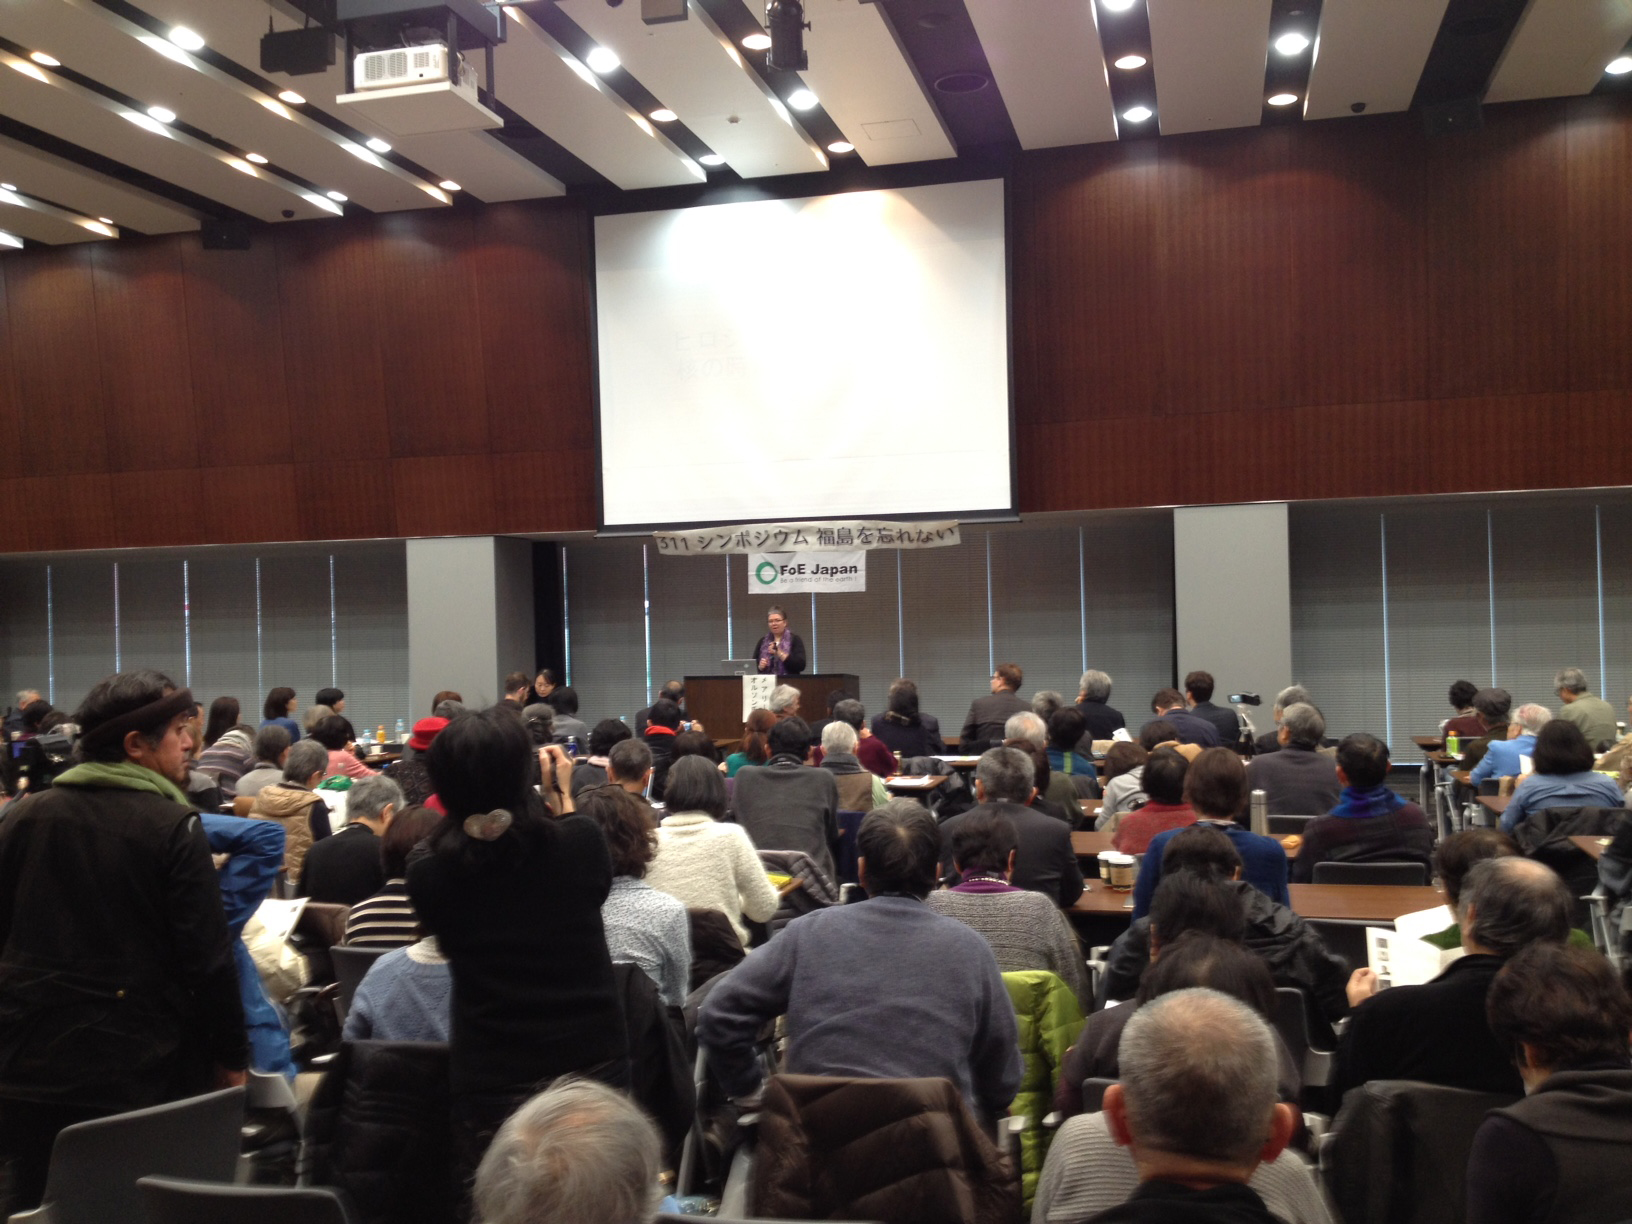 Mary Olson speaks at an event in Japan's Diet Building, March 11, 2016.